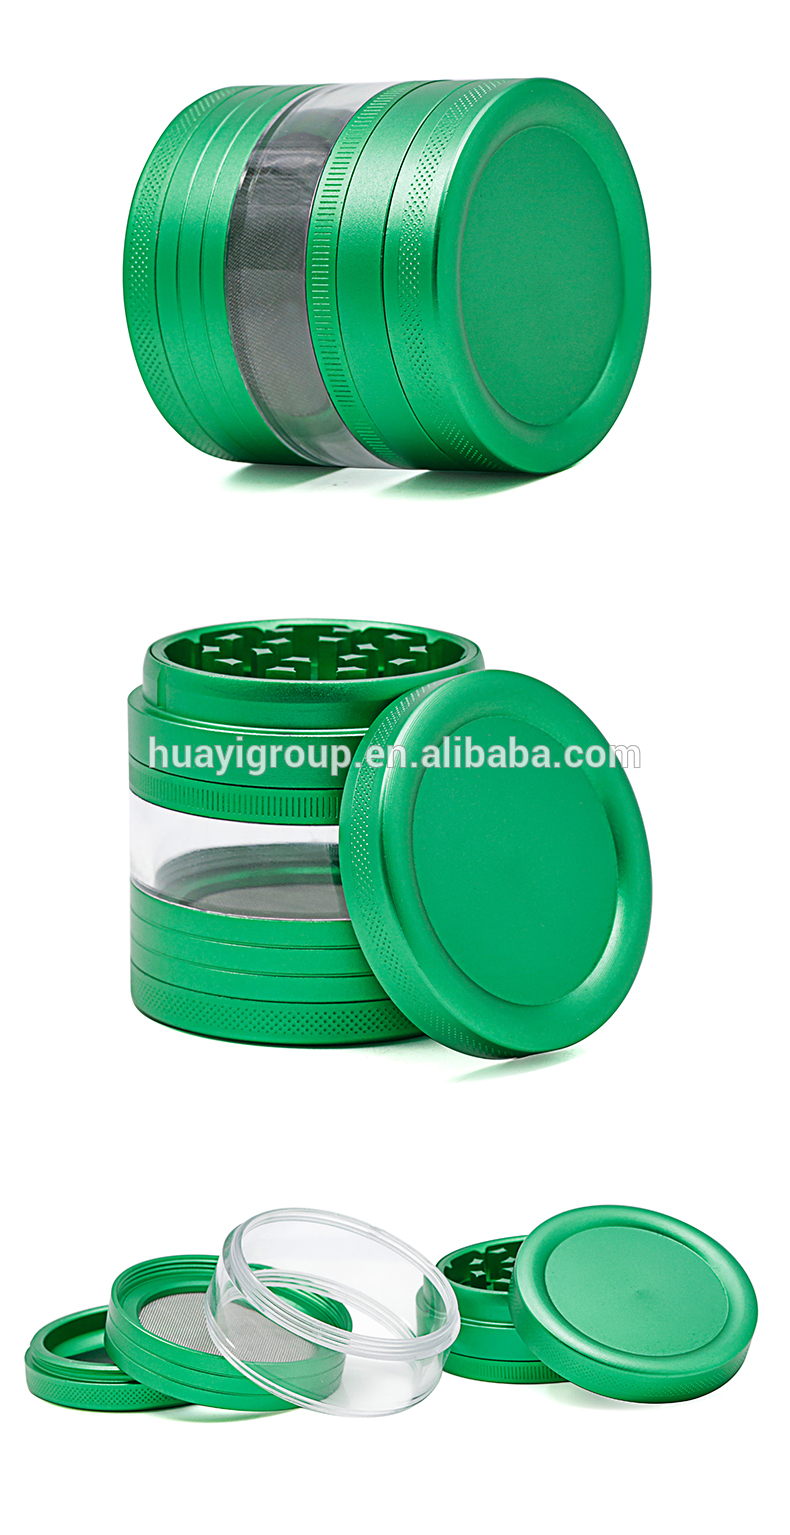 Hot selling 4 layer grinder Aluminum weed herb grinder with transparent acry layer custom logo smoking accessories weed grinder